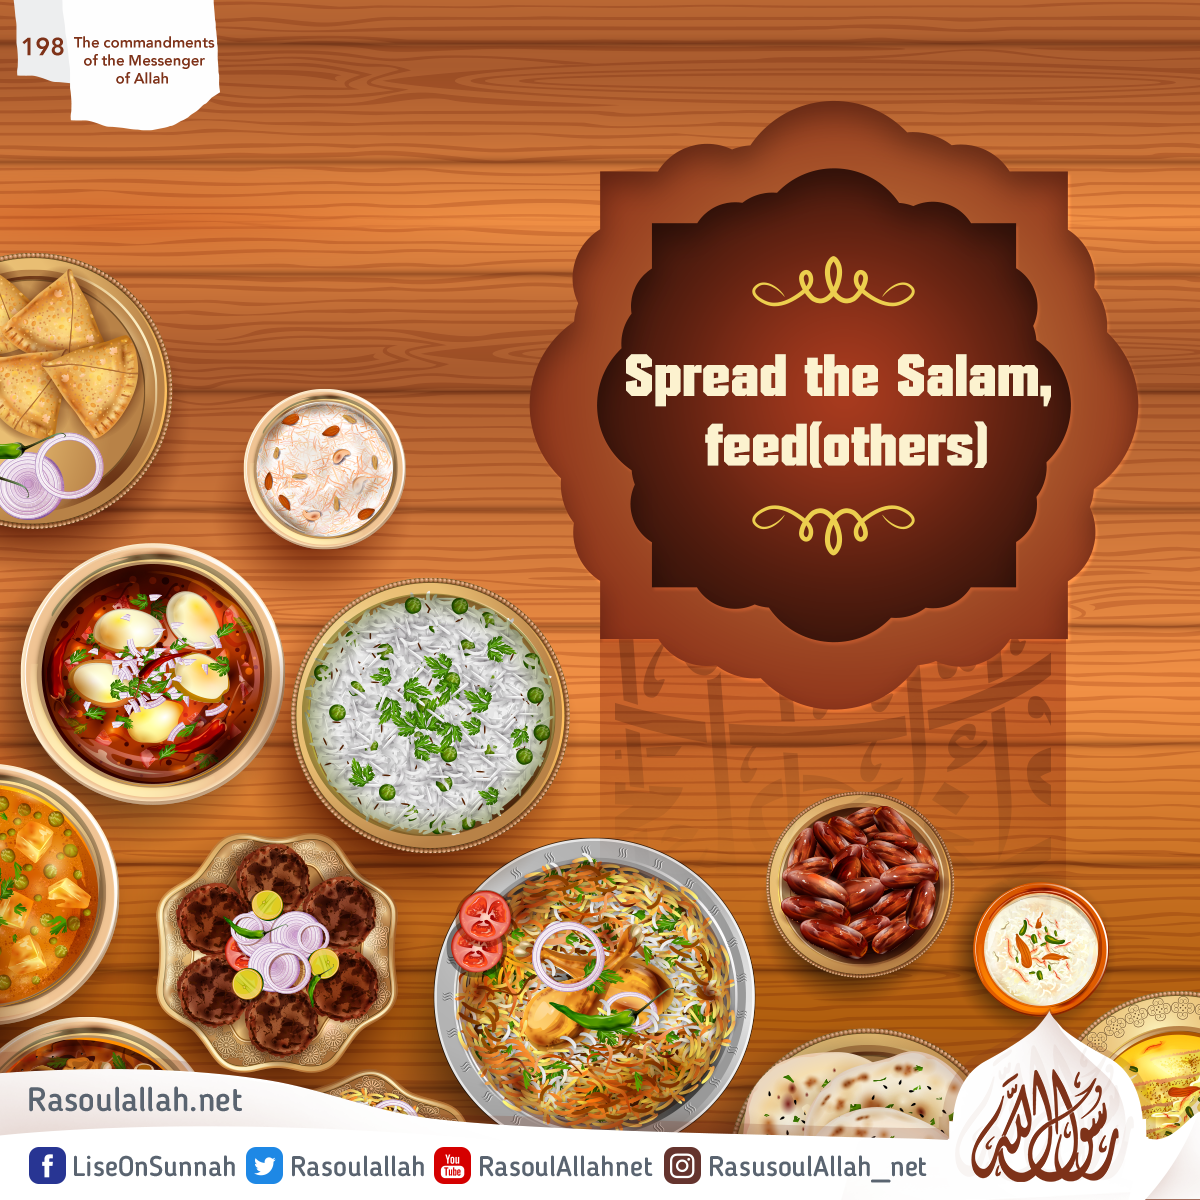 Spread the Salam, feed(others)